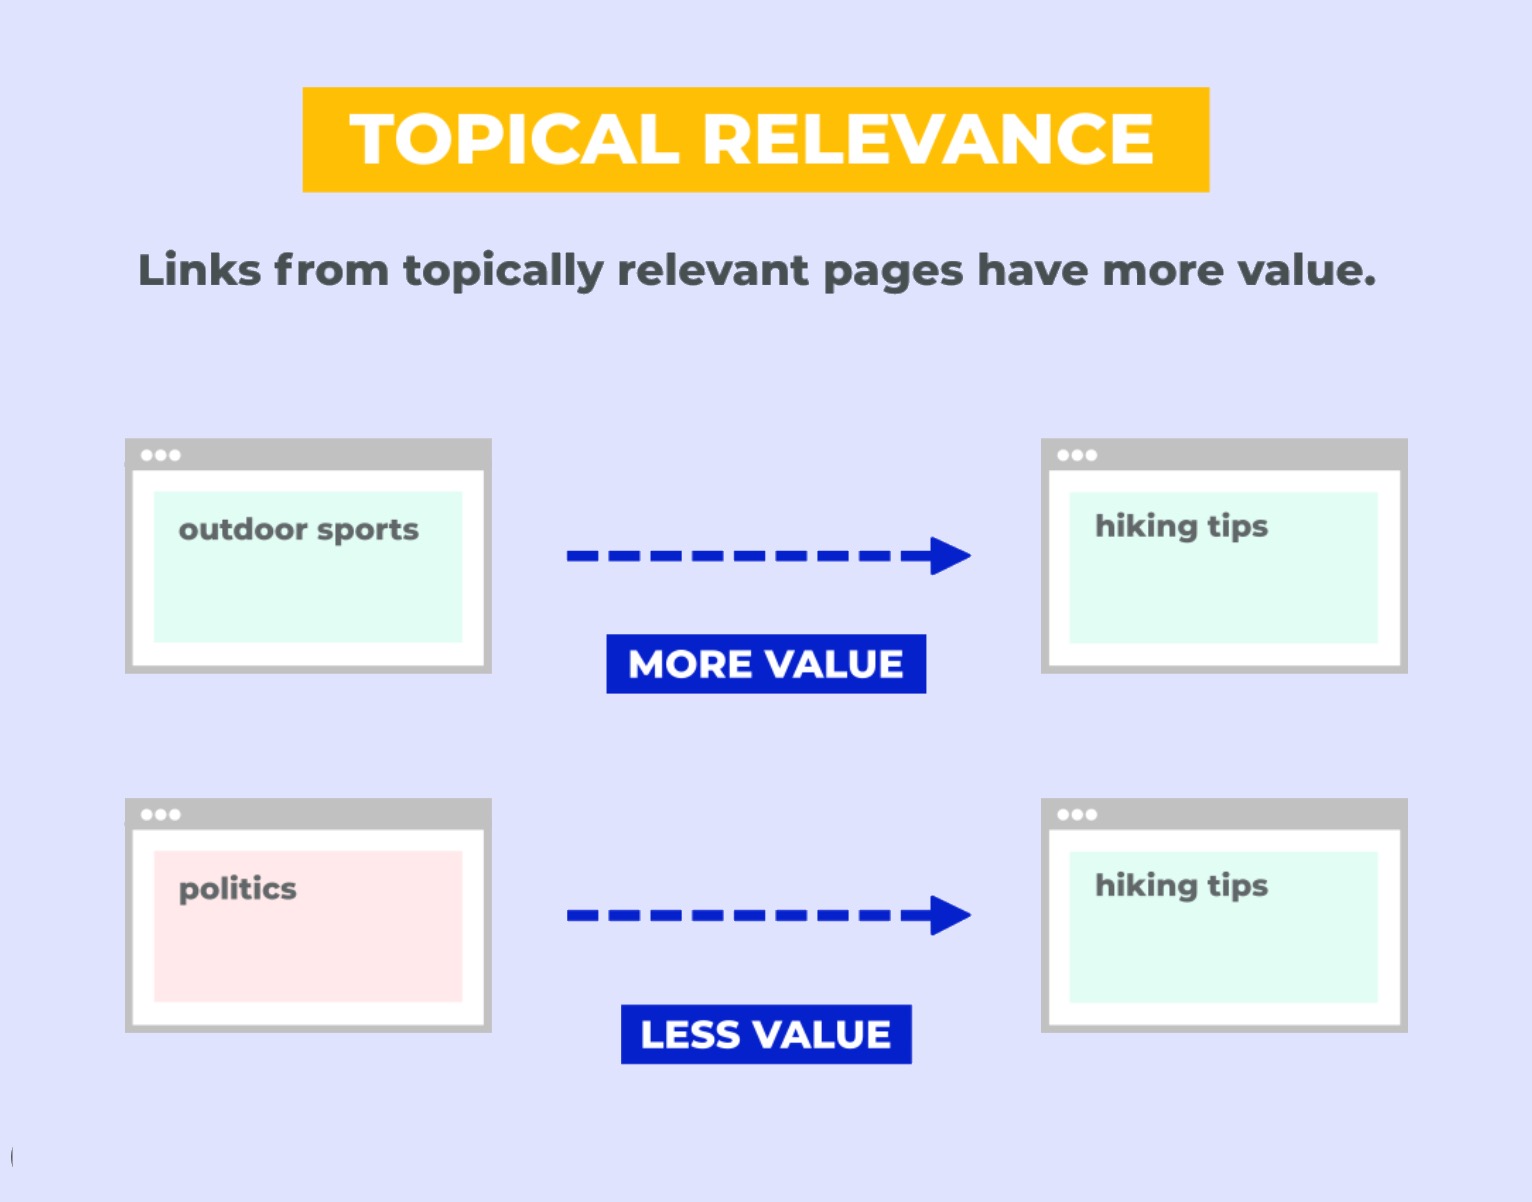 Links from topically relevant pages have more value.